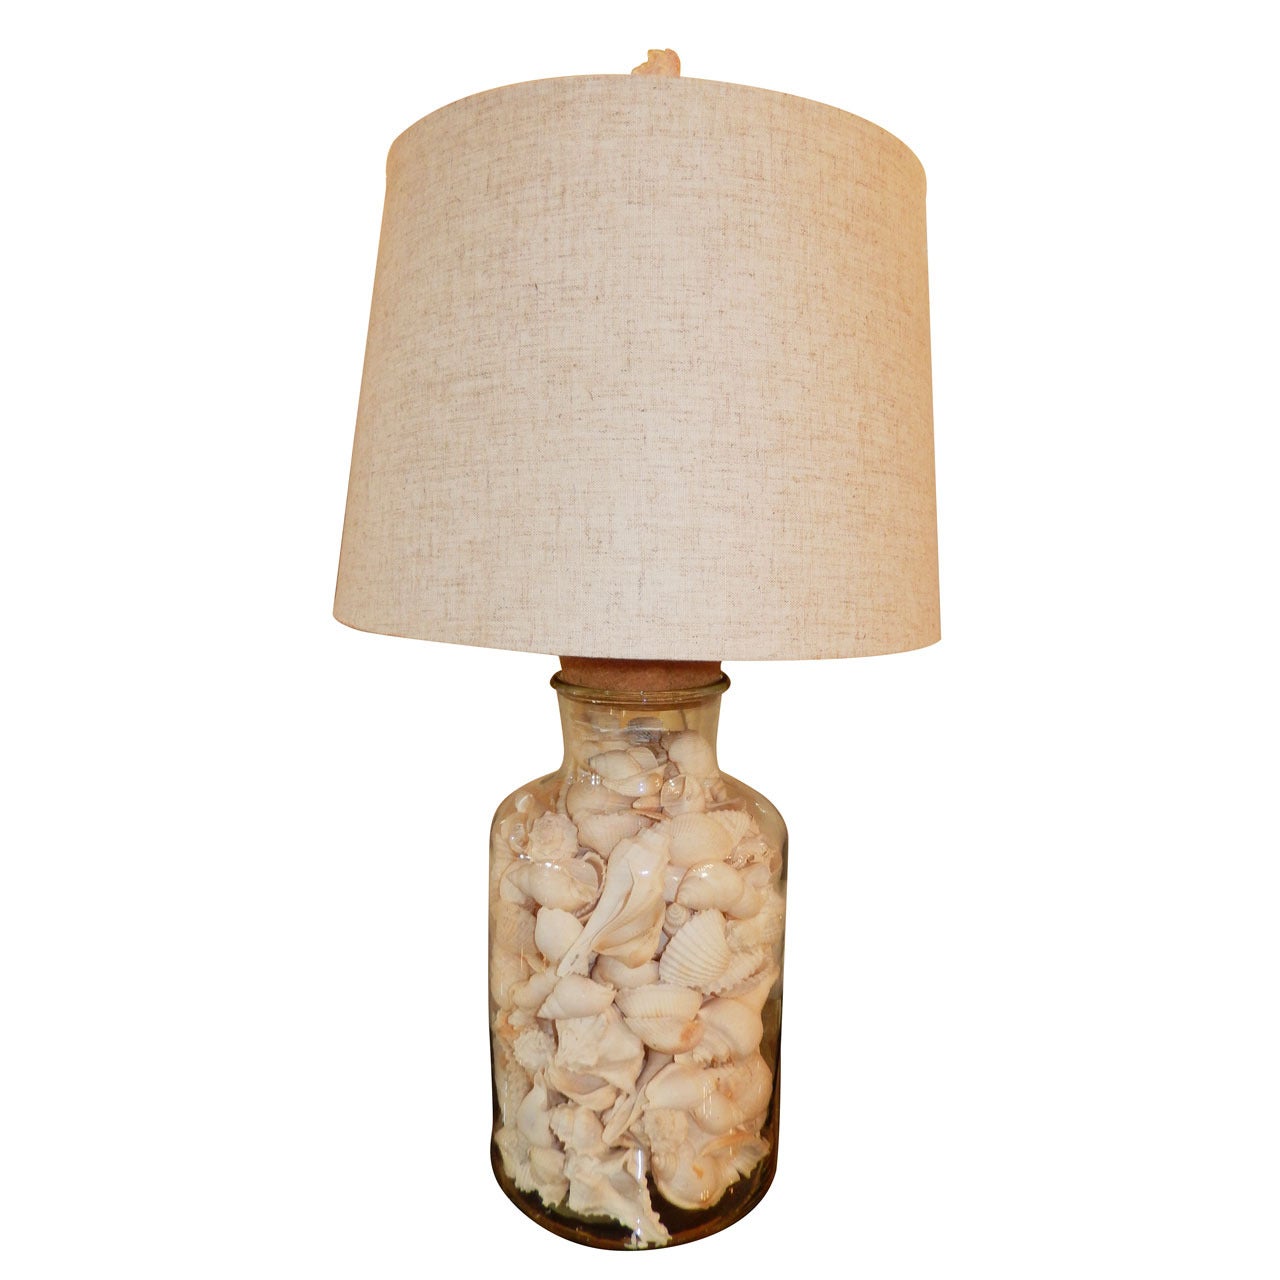 A Large Glass & Natural Sea Shell Lamp